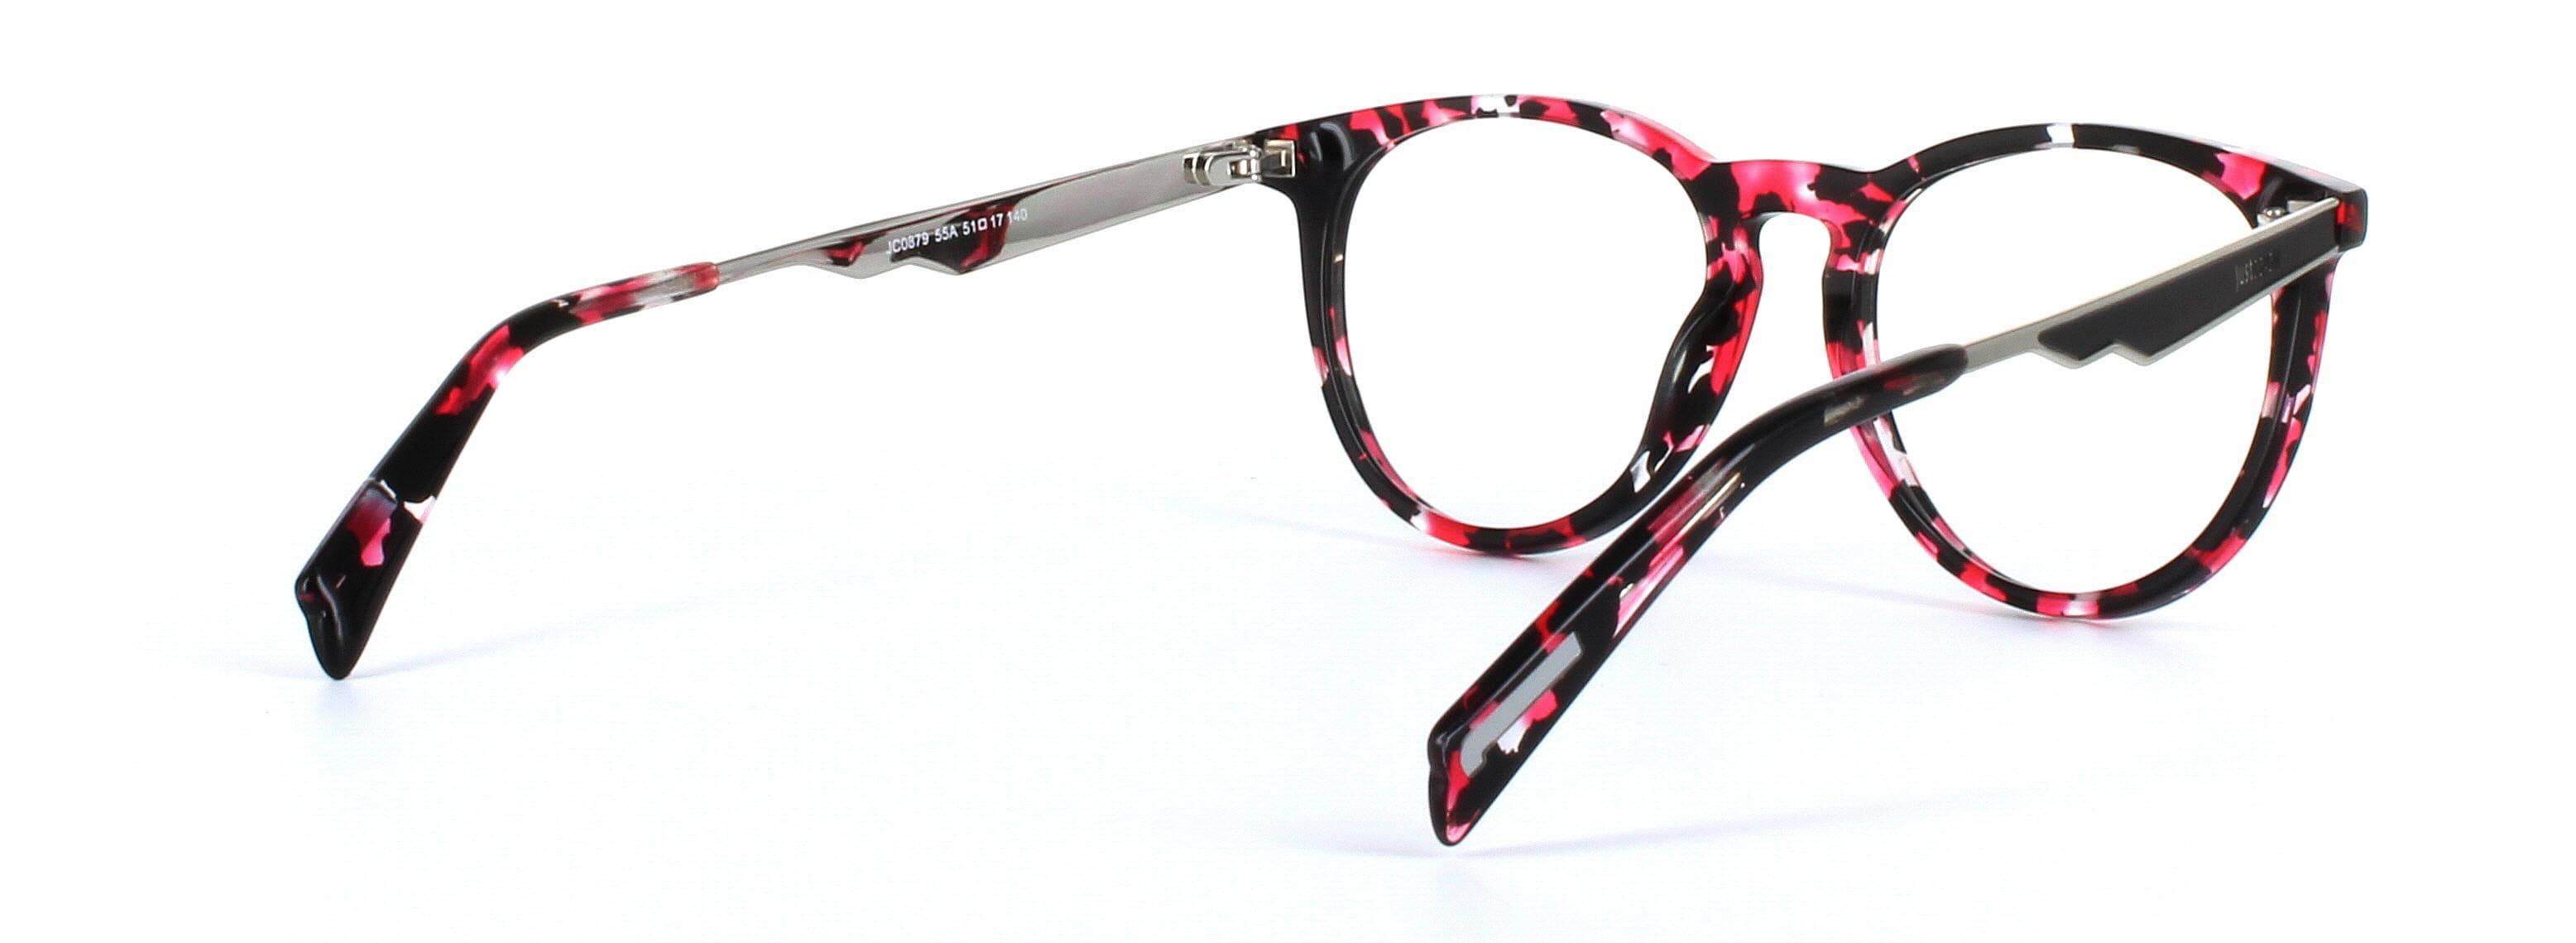 JUST CAVALLI (JC0879-55A) Black and Red Full Rim Round Acetate Glasses - Image View 4